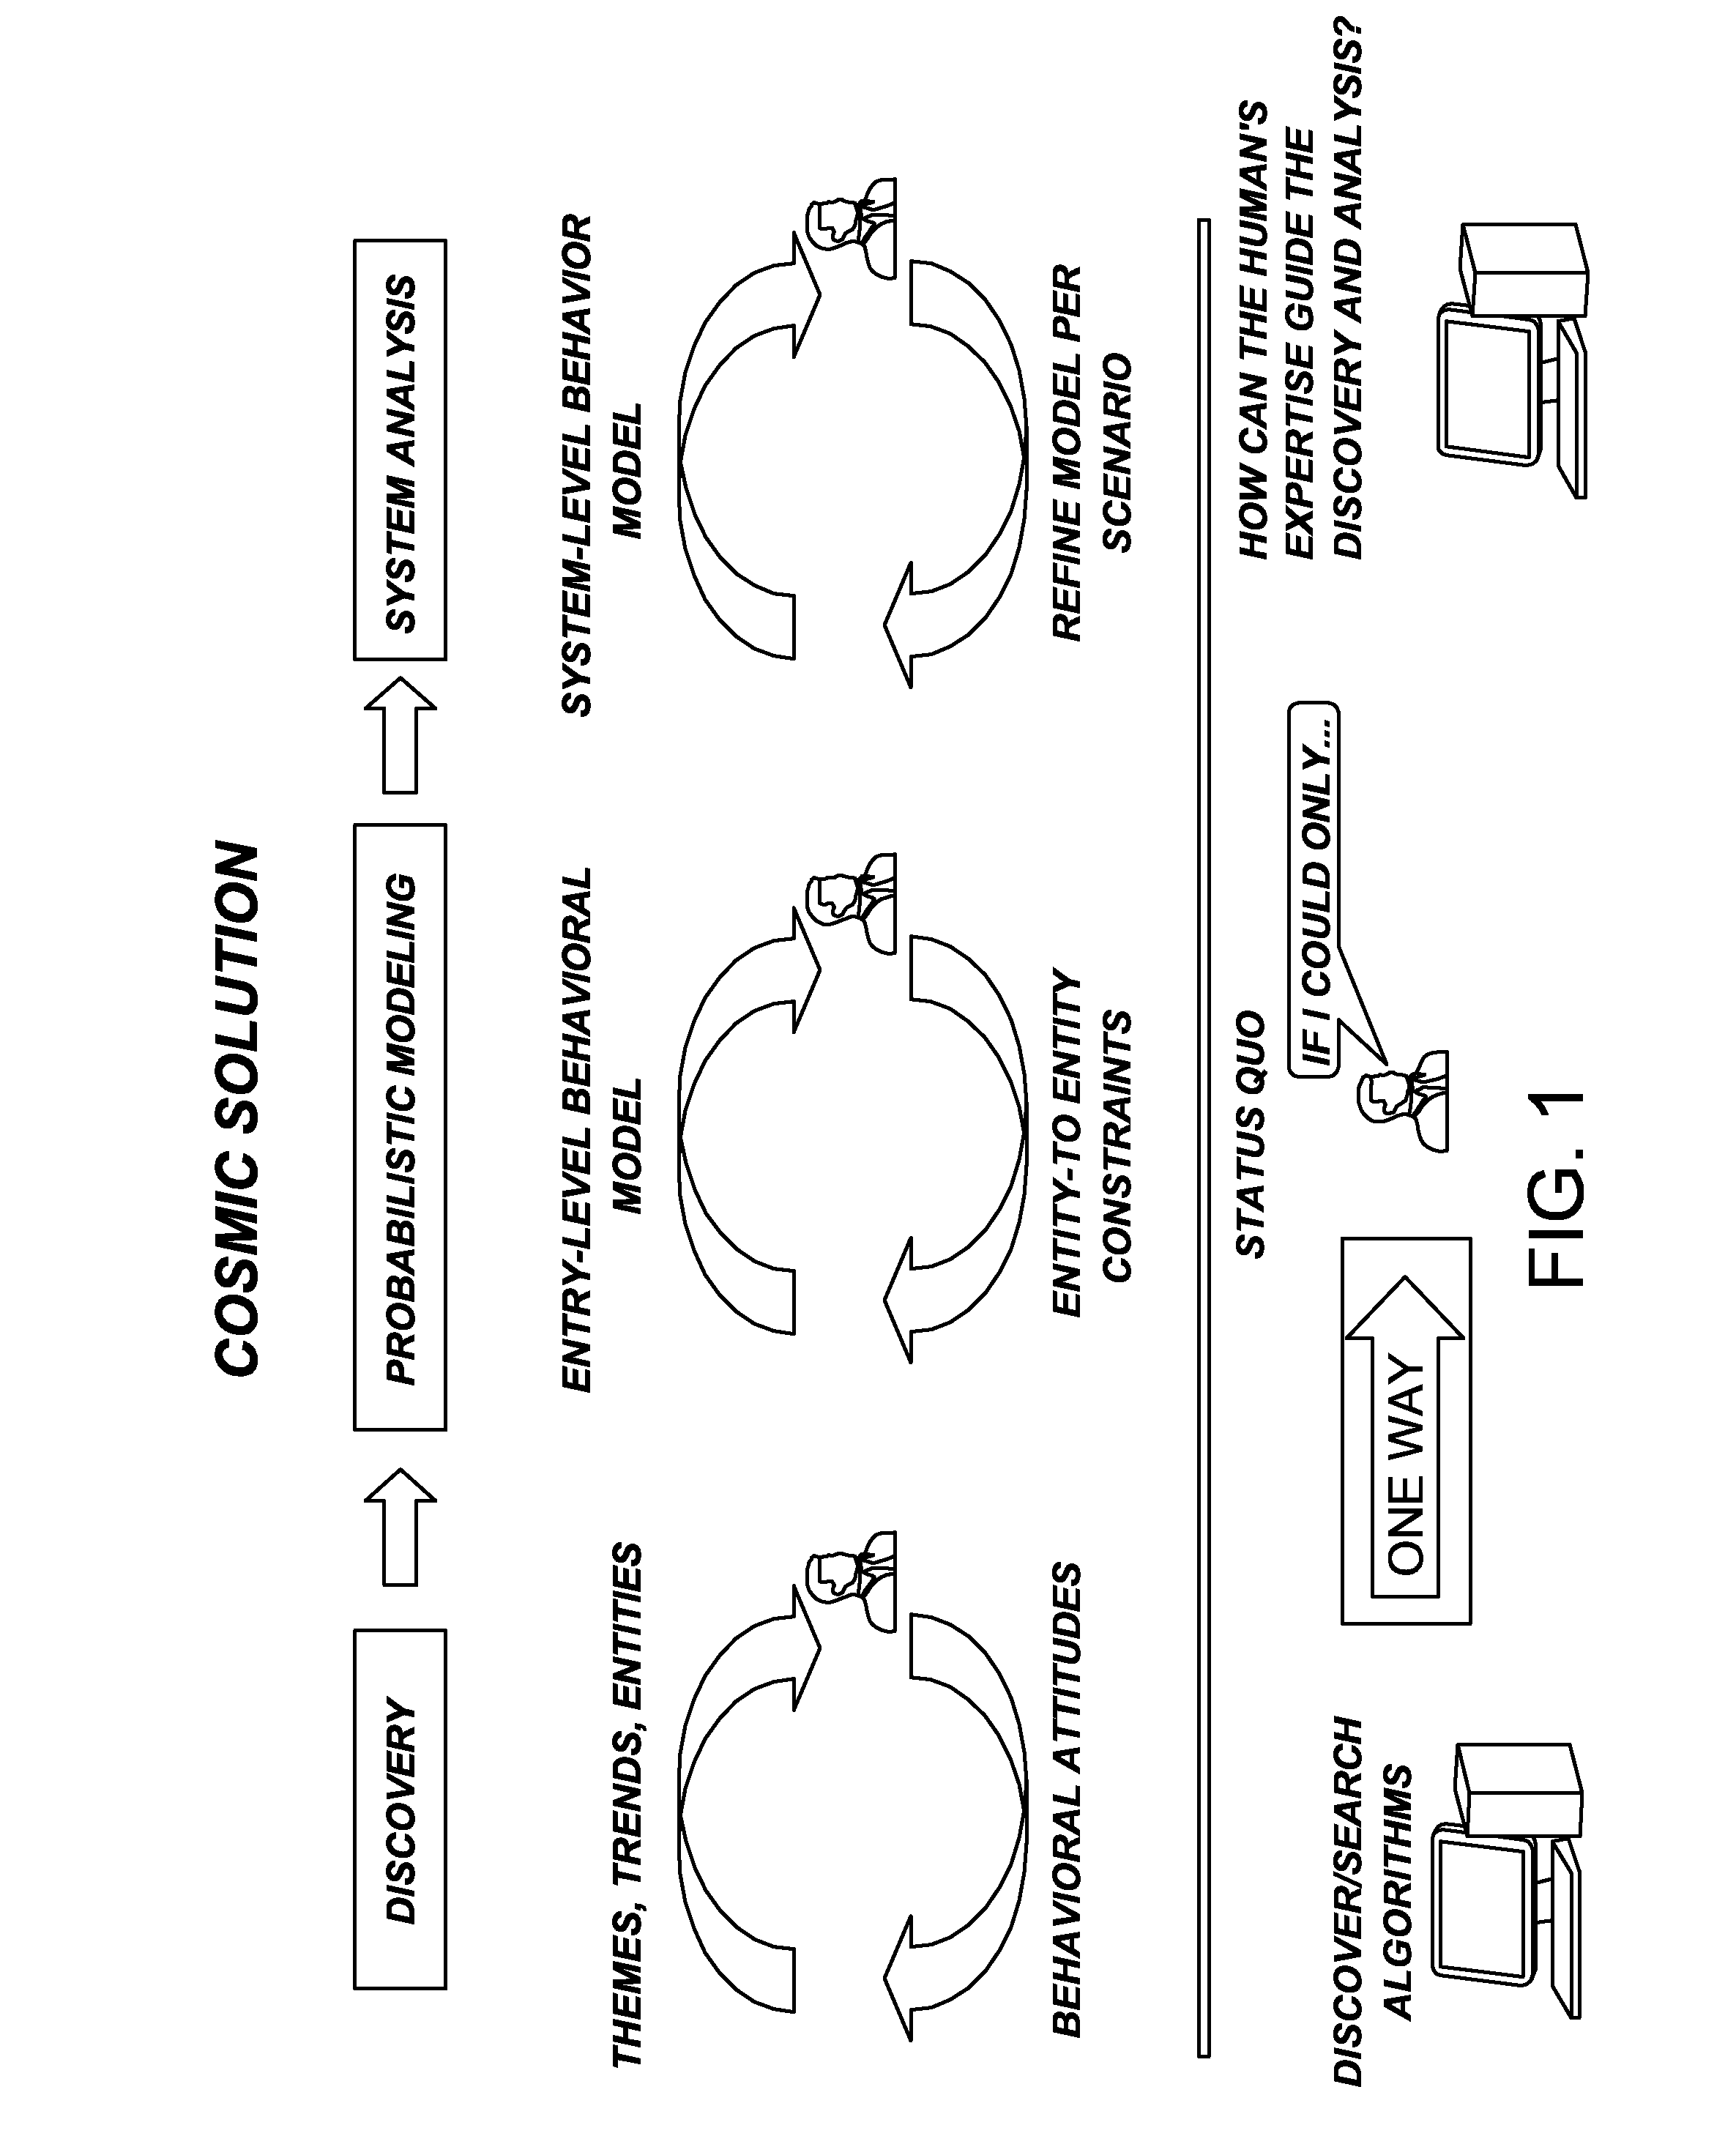 Method and apparatus for creating a predictive model